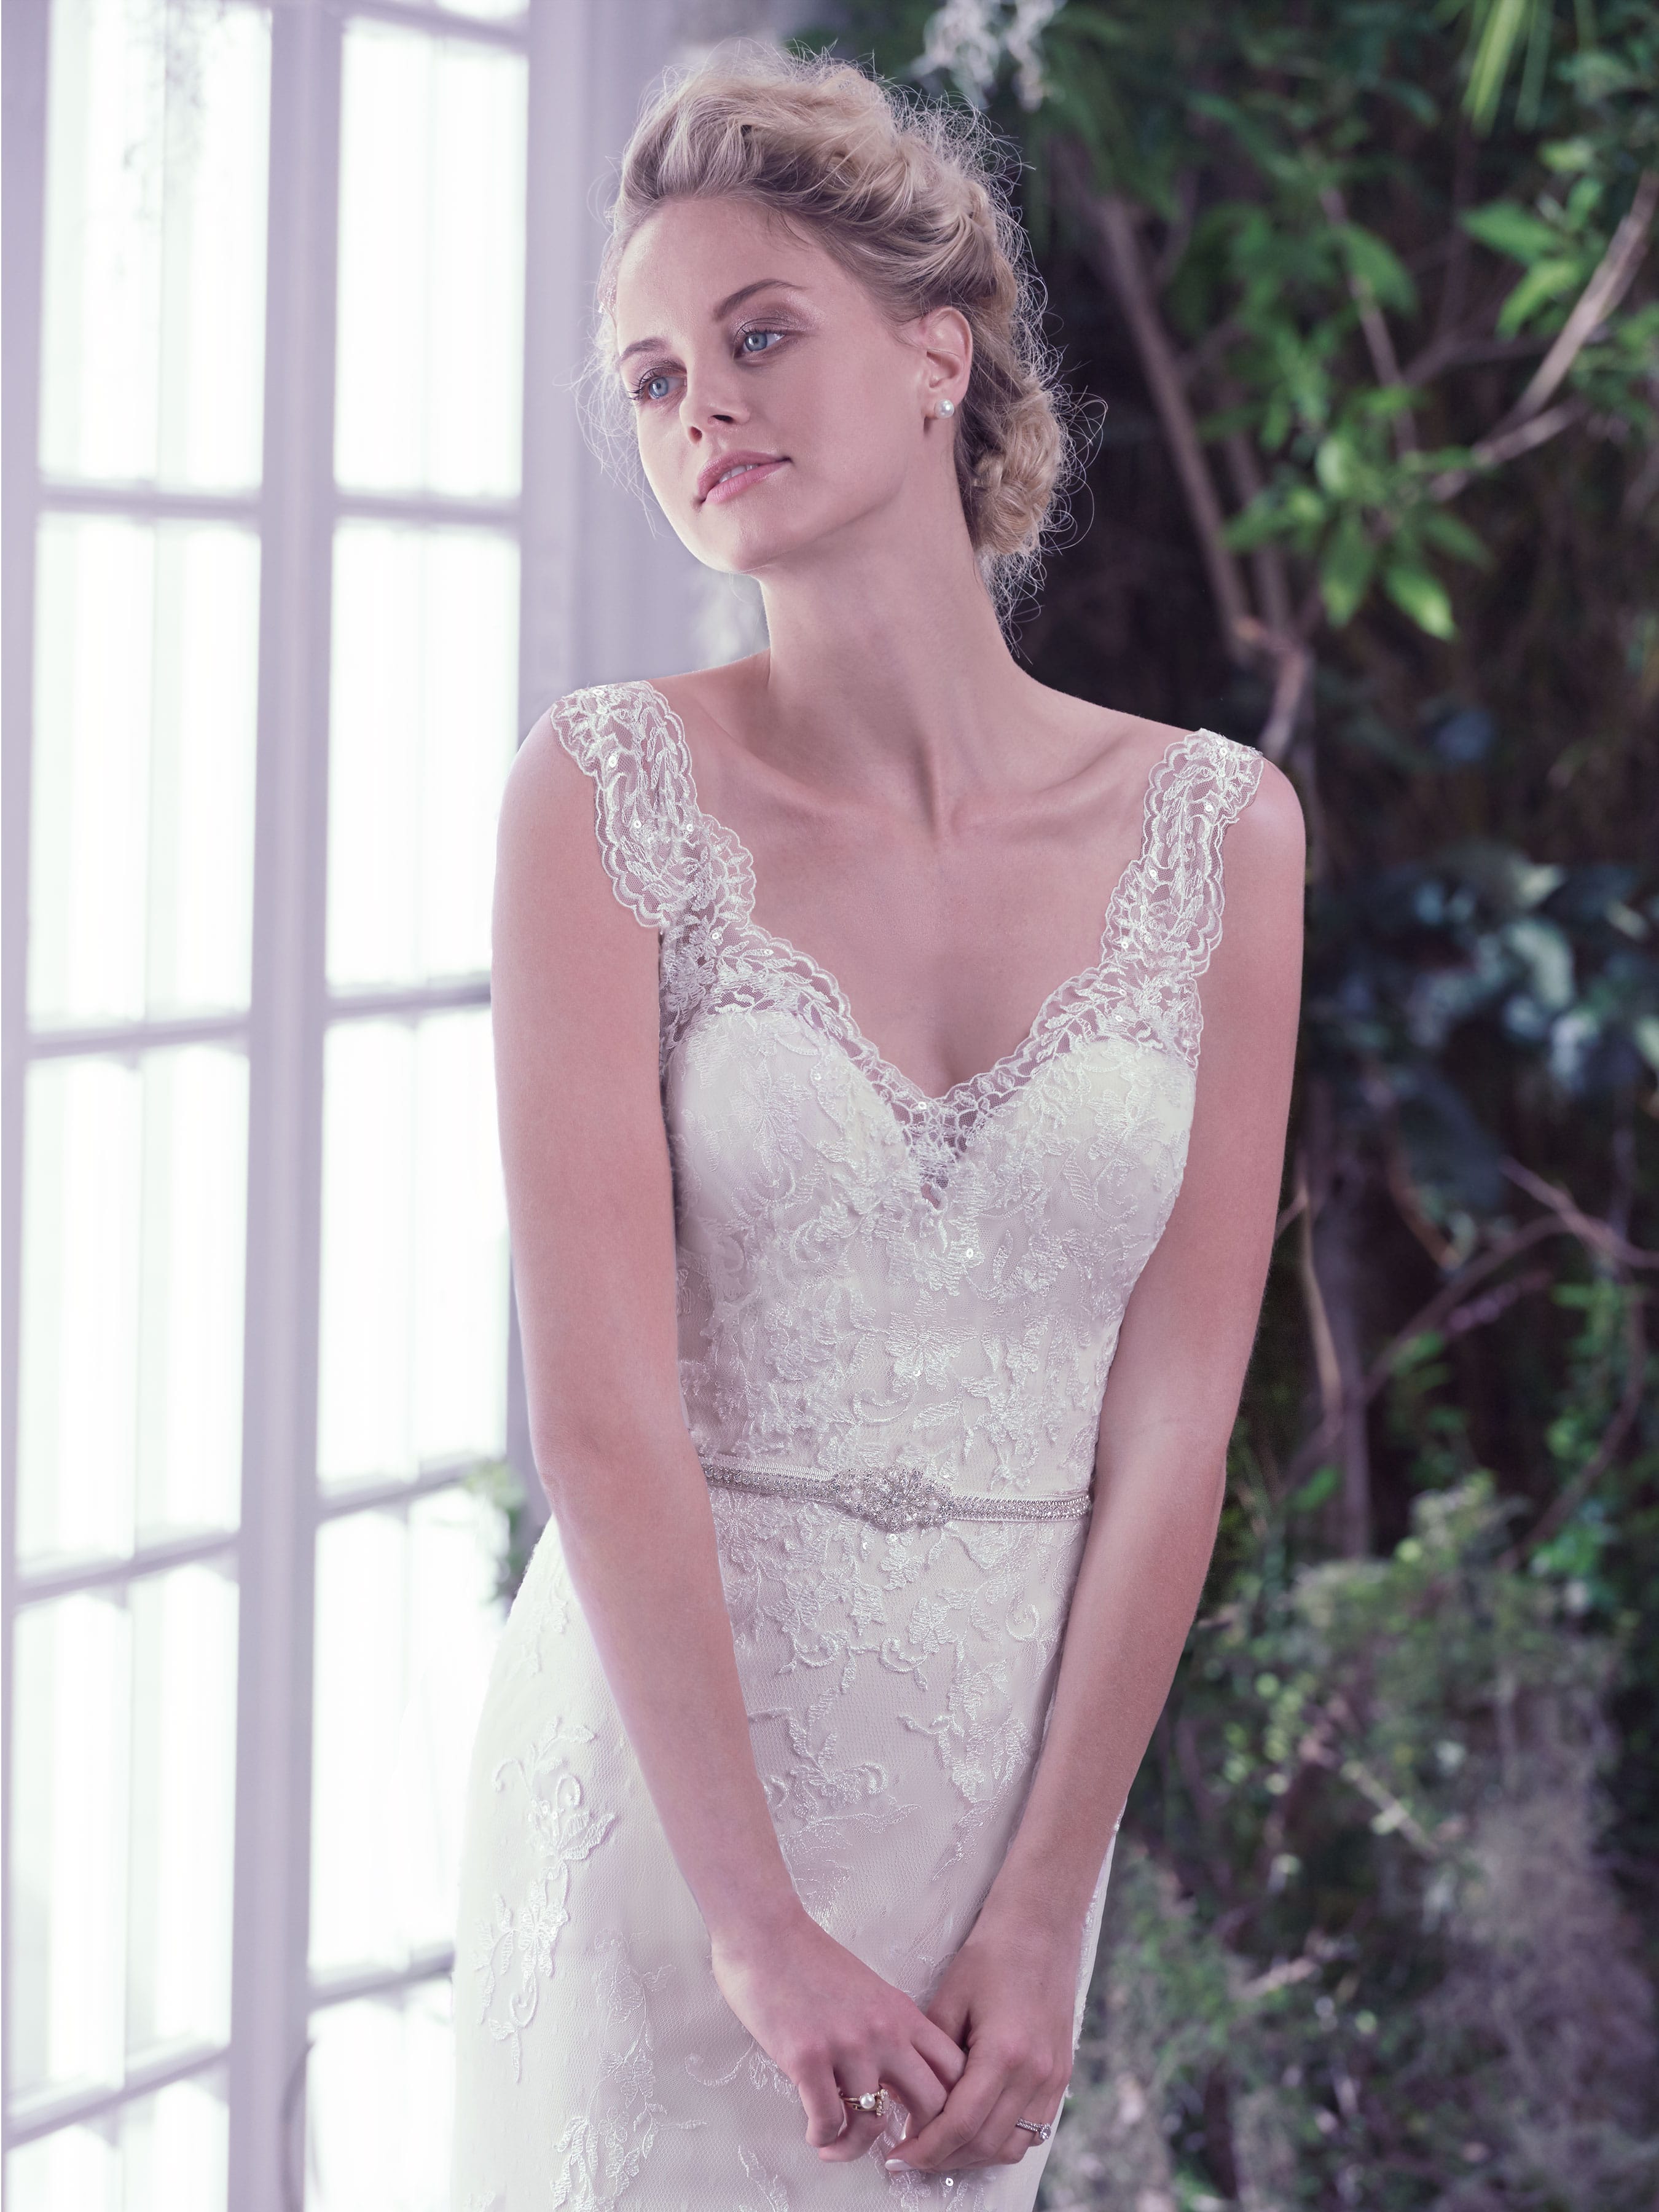 Roberta by Maggie Sottero features sheer lace sleeves and an illusion V-neck over sweetheart neckline.